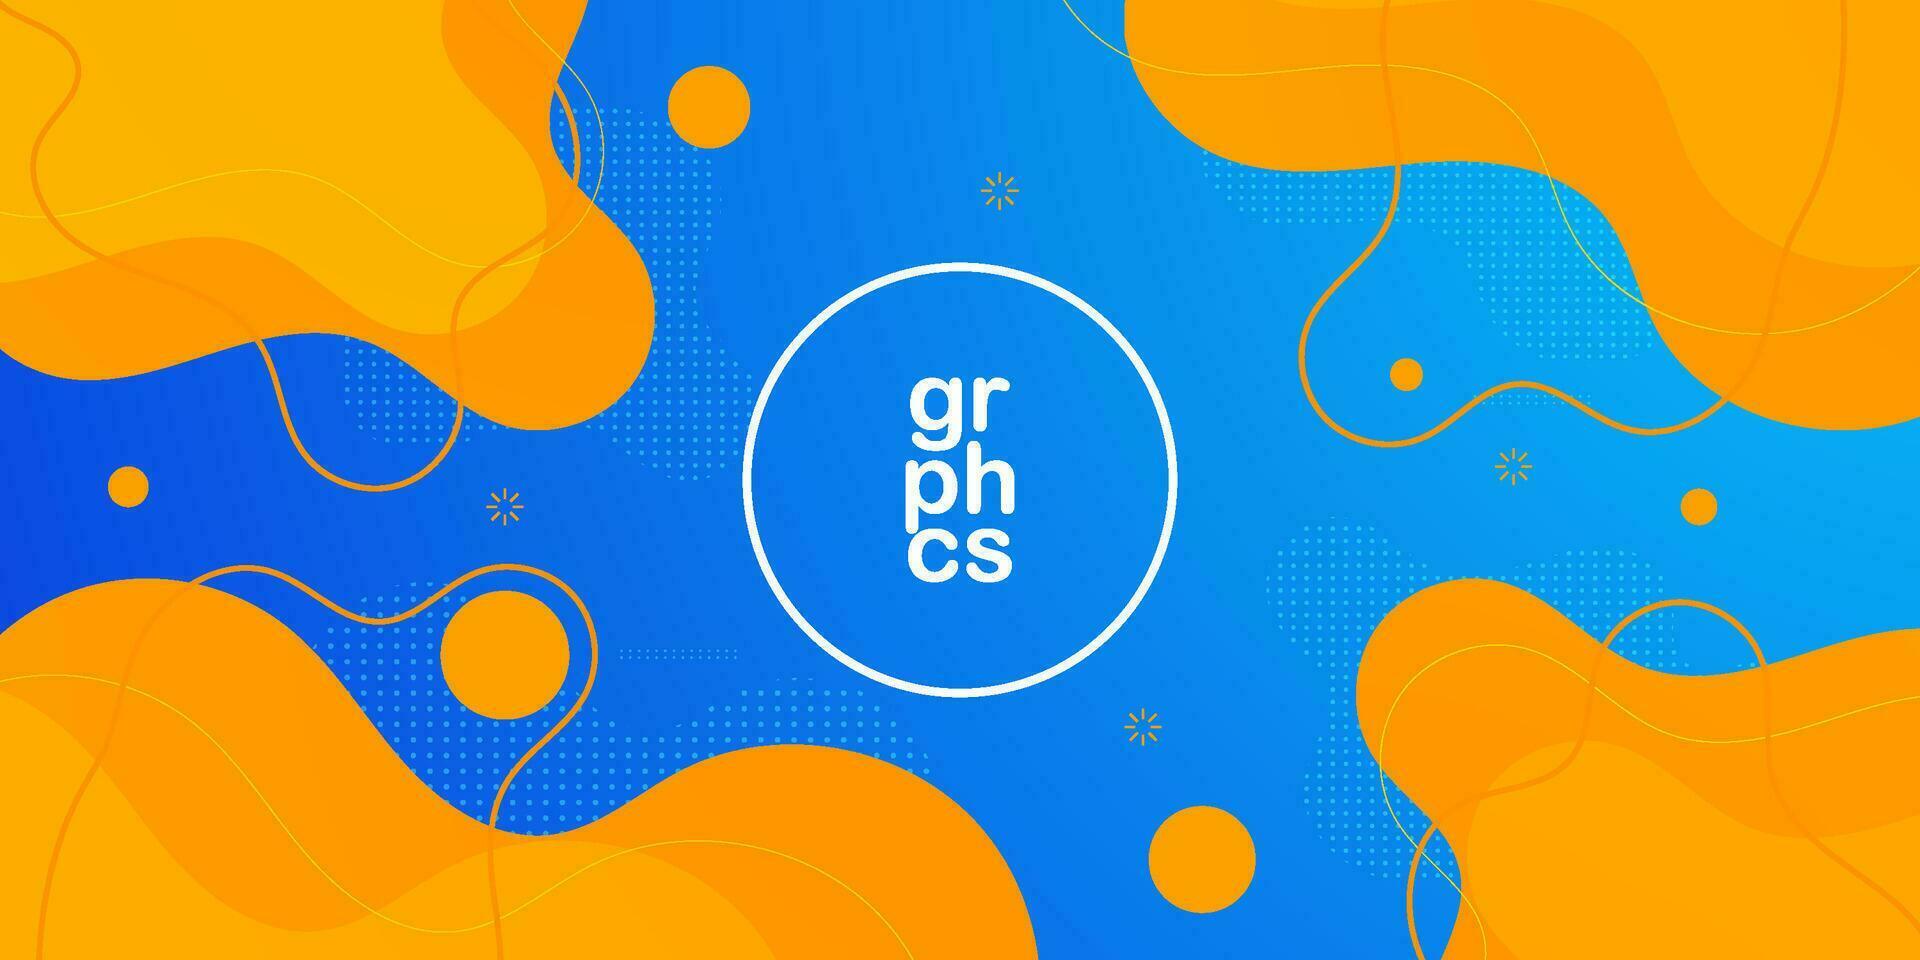 Blue and orange liquid geometric abstract background design. Creative banner design with fluid wave shapes and liquid lines for template. Simple background design. Eps10 vector